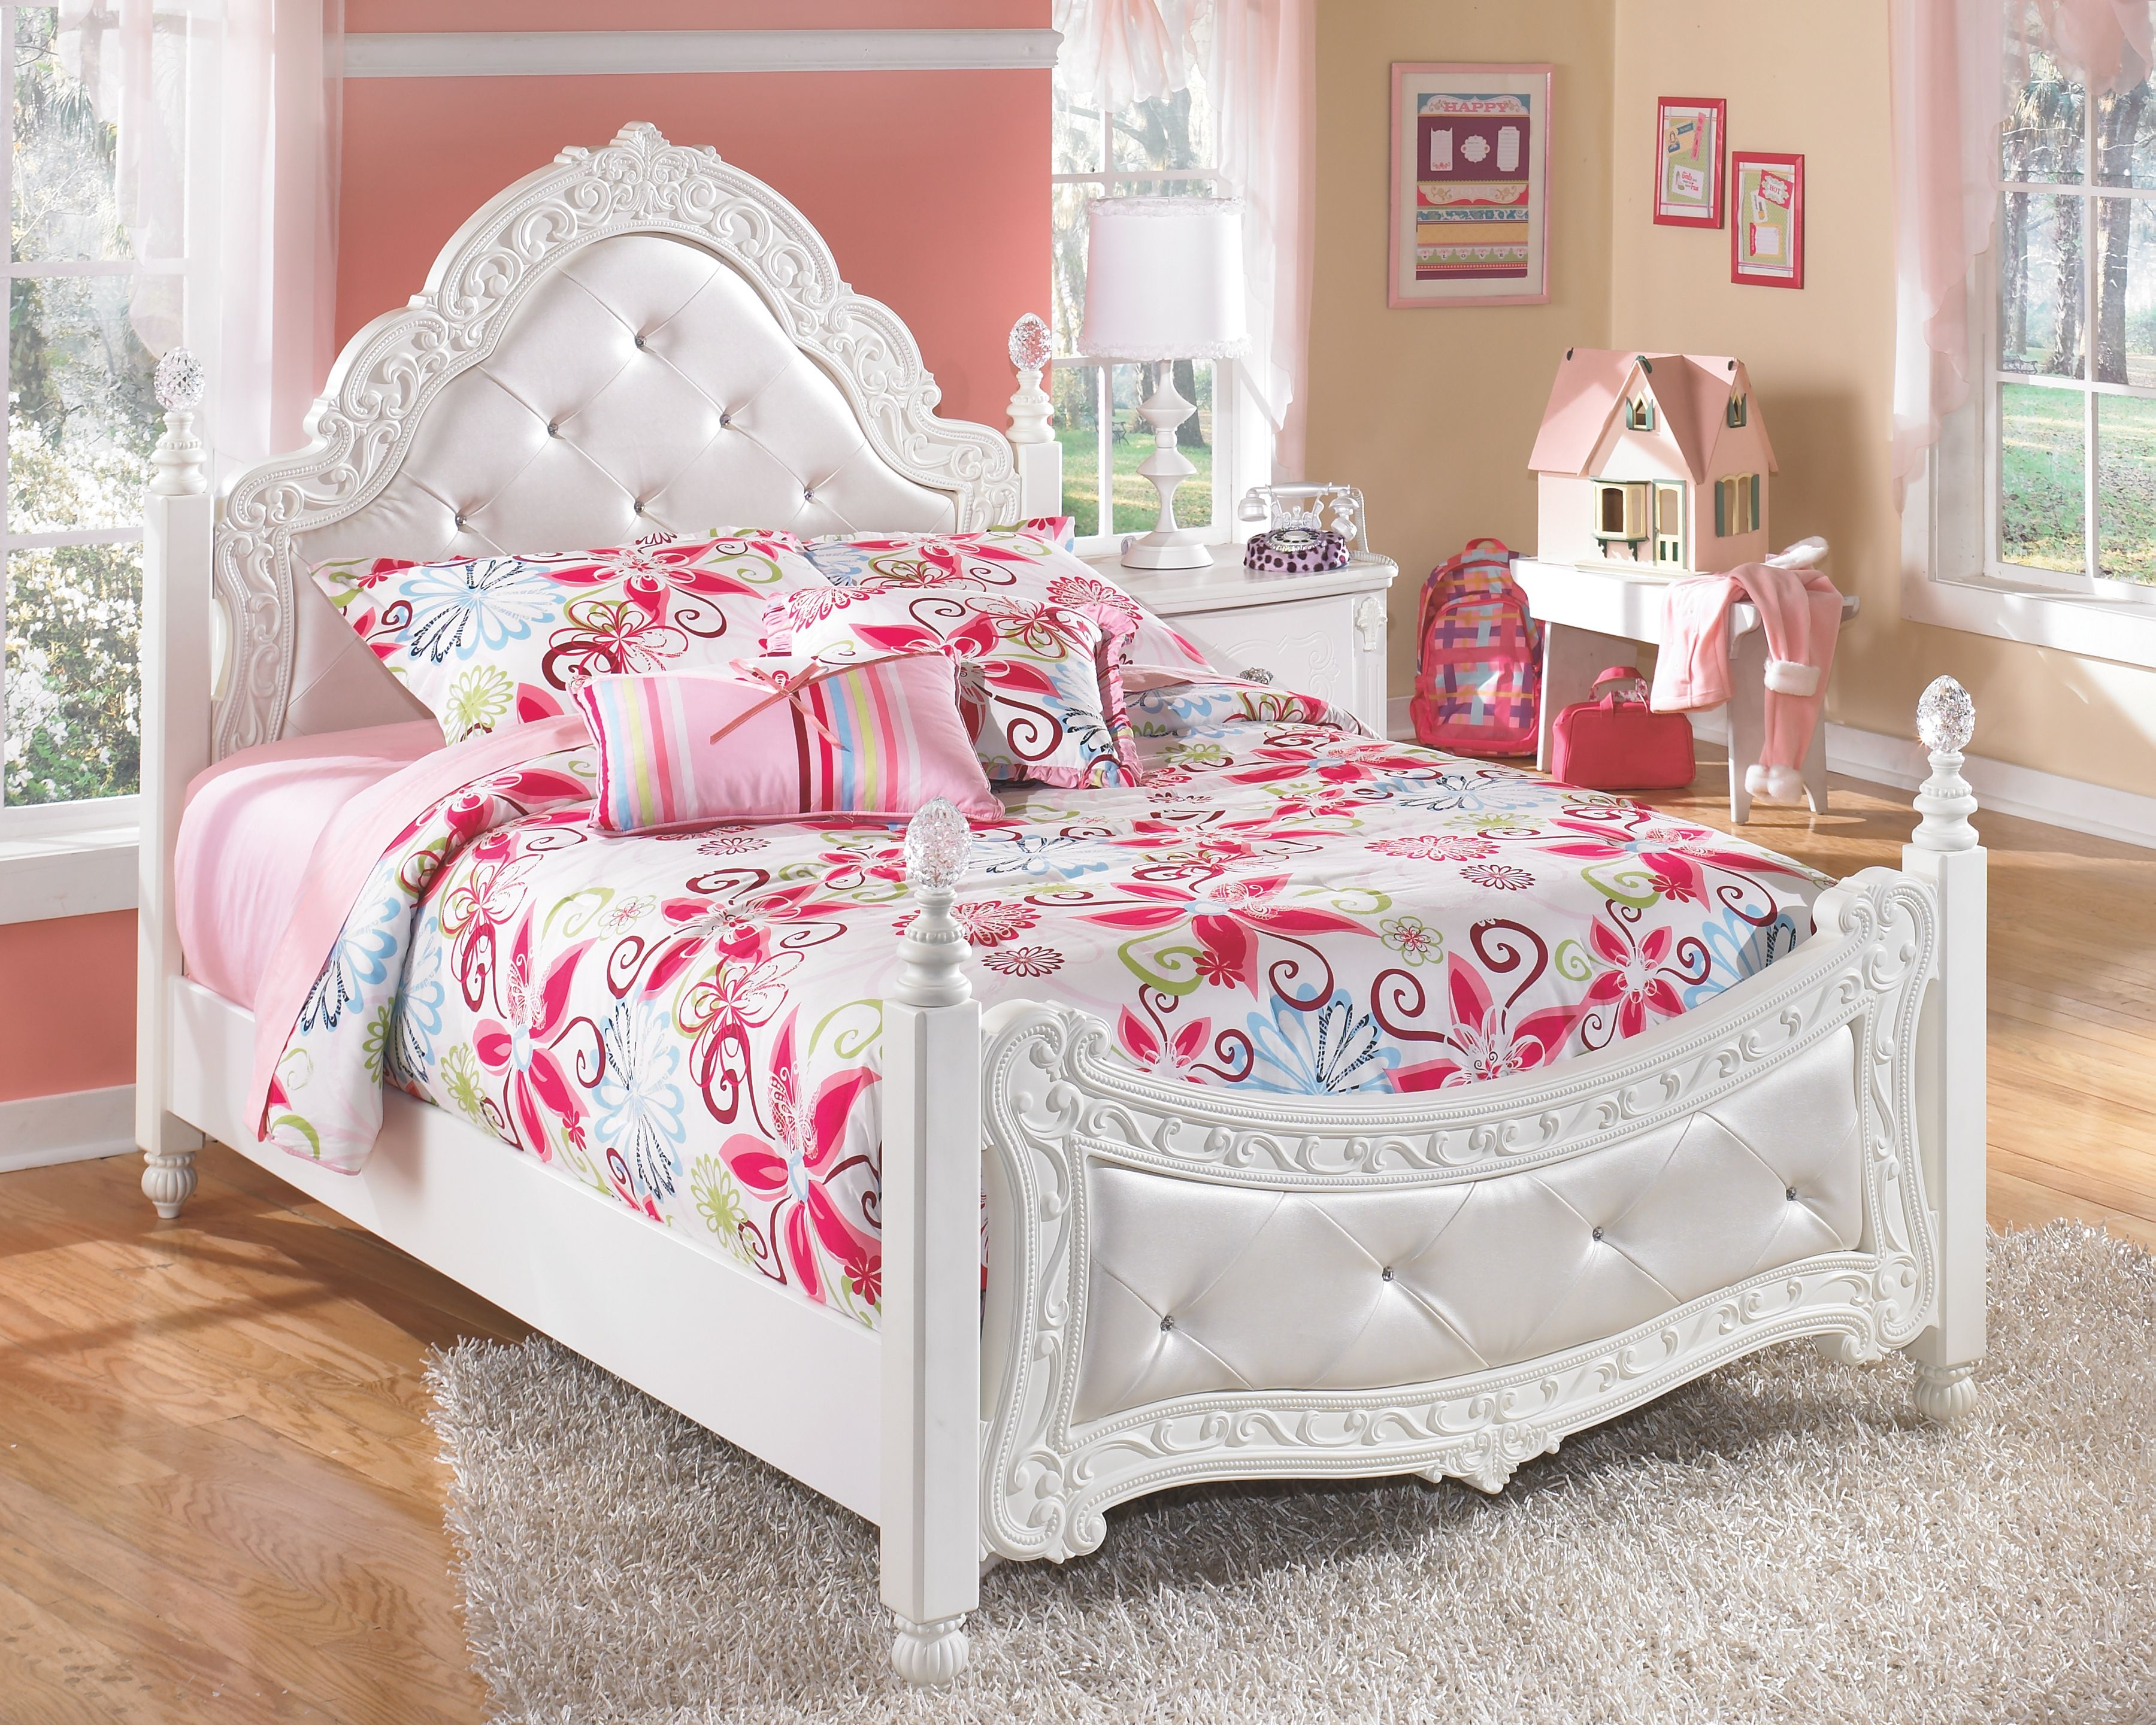 Exquisite Full Poster Bed Products Bedroom Furniture Sets Girls pertaining to size 3600 X 2881